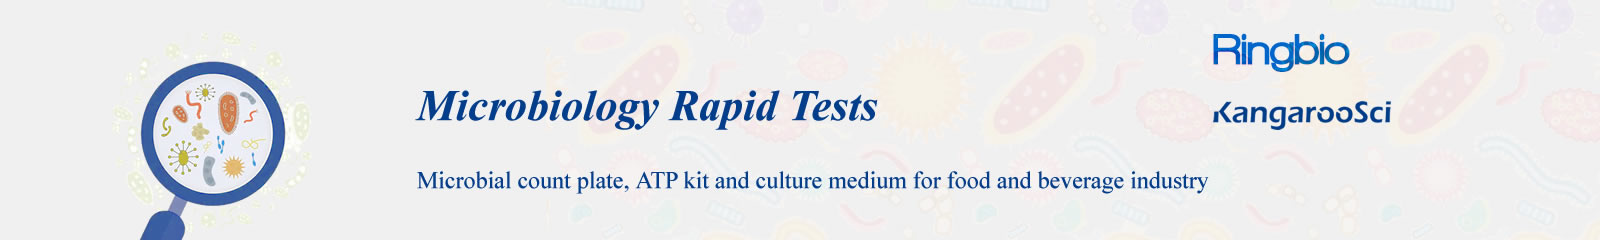 Microbiology Rapid Tests, Microbial count plate, ATP kit and culture medium for food and beverage industry